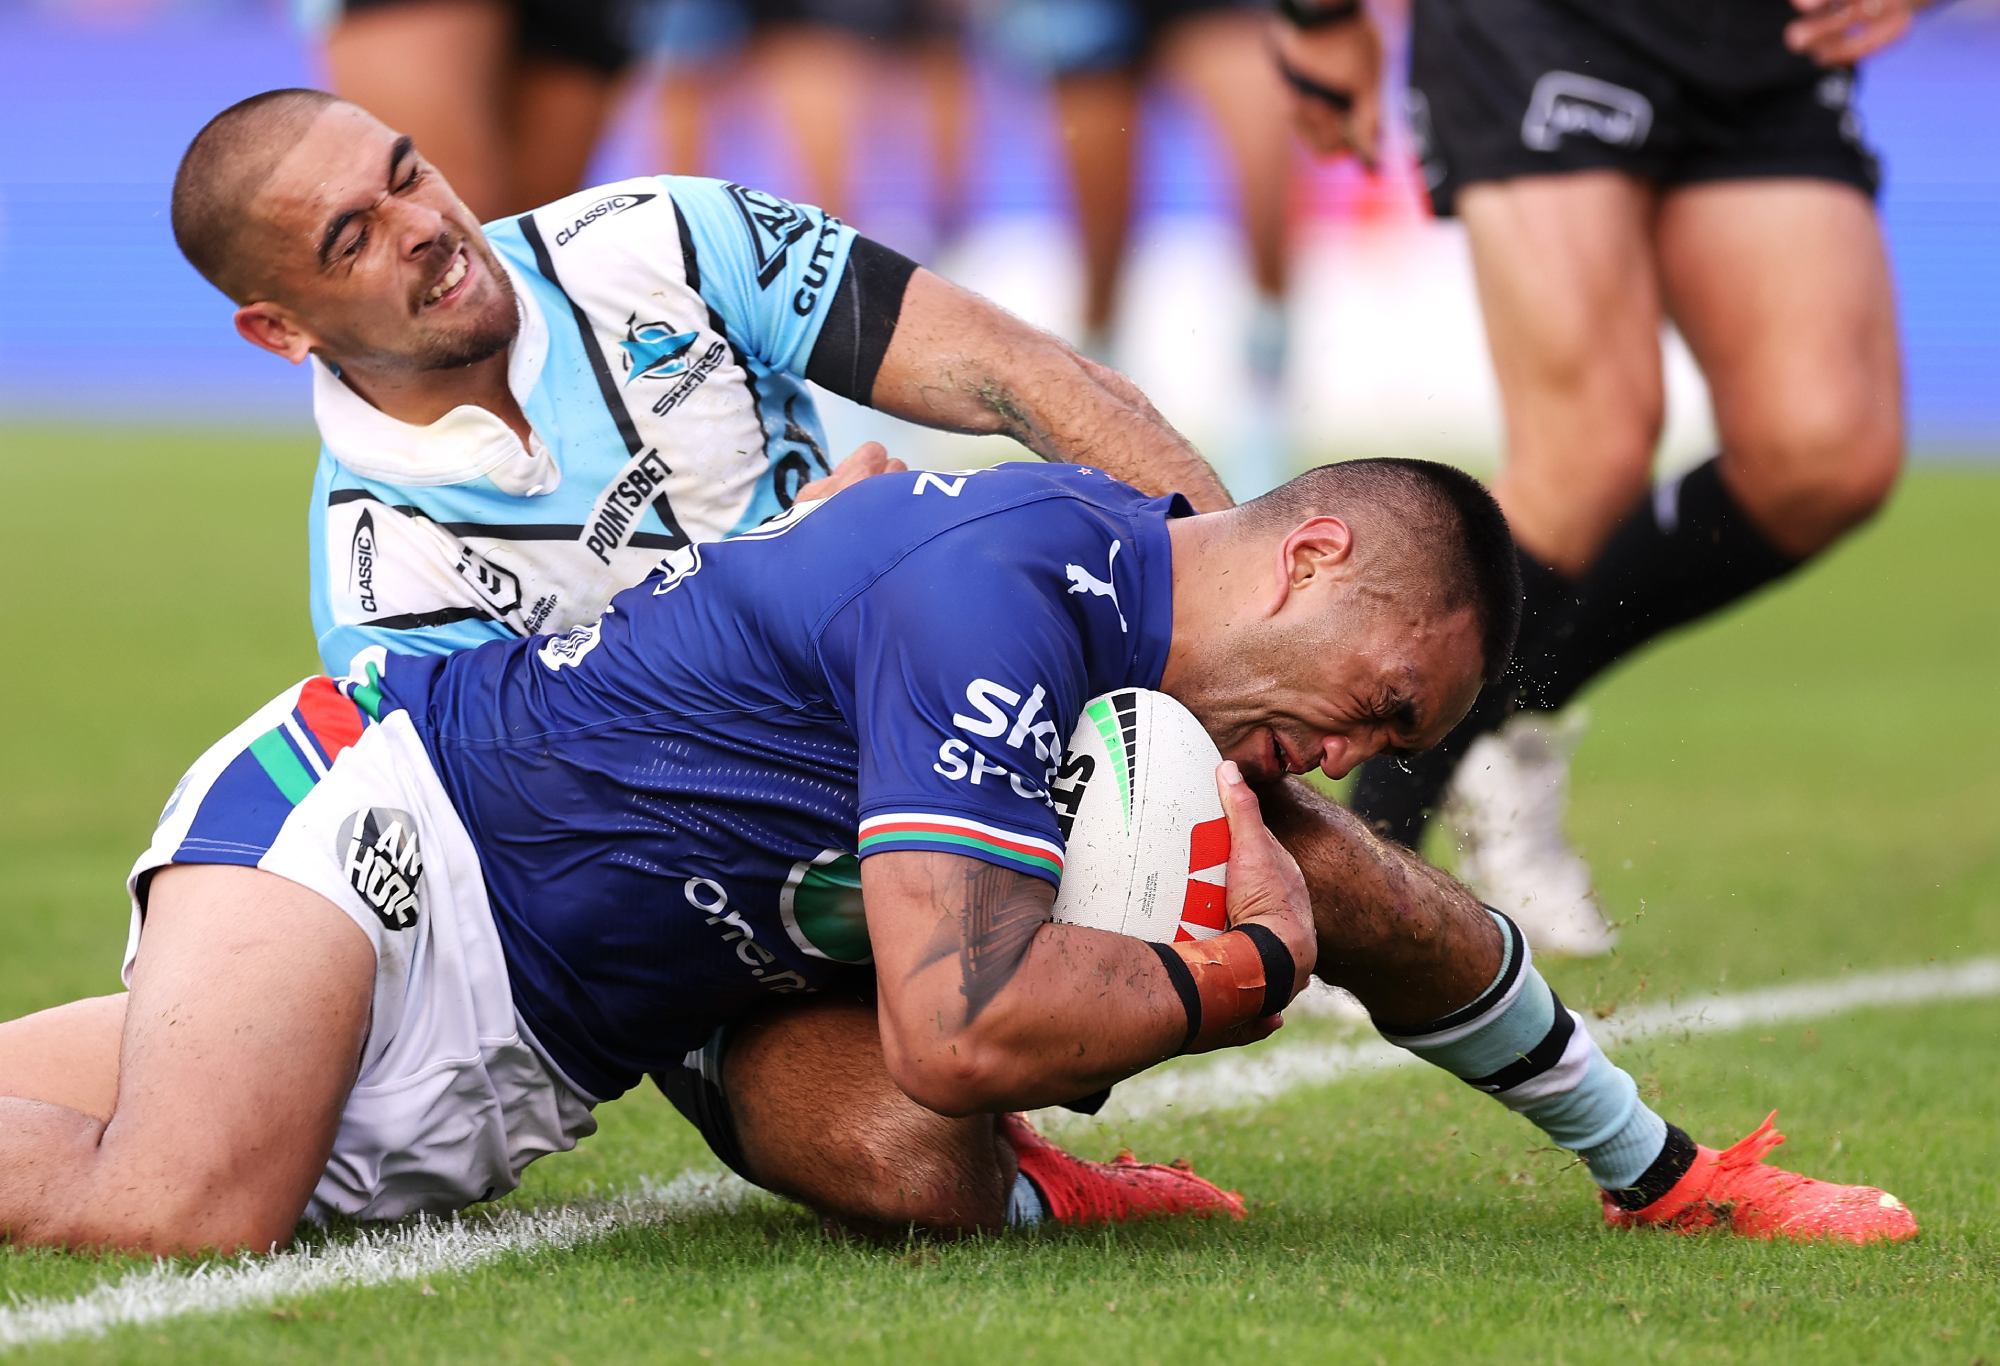 SYDNEY, AUSTRALIA - APRIL 02: Marata Niukore of the Warriors scores a try as he is tackled by William Kennedy of the Sharks during the round five NRL match between Cronulla Sharks and New Zealand Warriors at PointsBet Stadium on April 02, 2023 in Sydney, Australia. (Photo by Mark Kolbe/Getty Images)